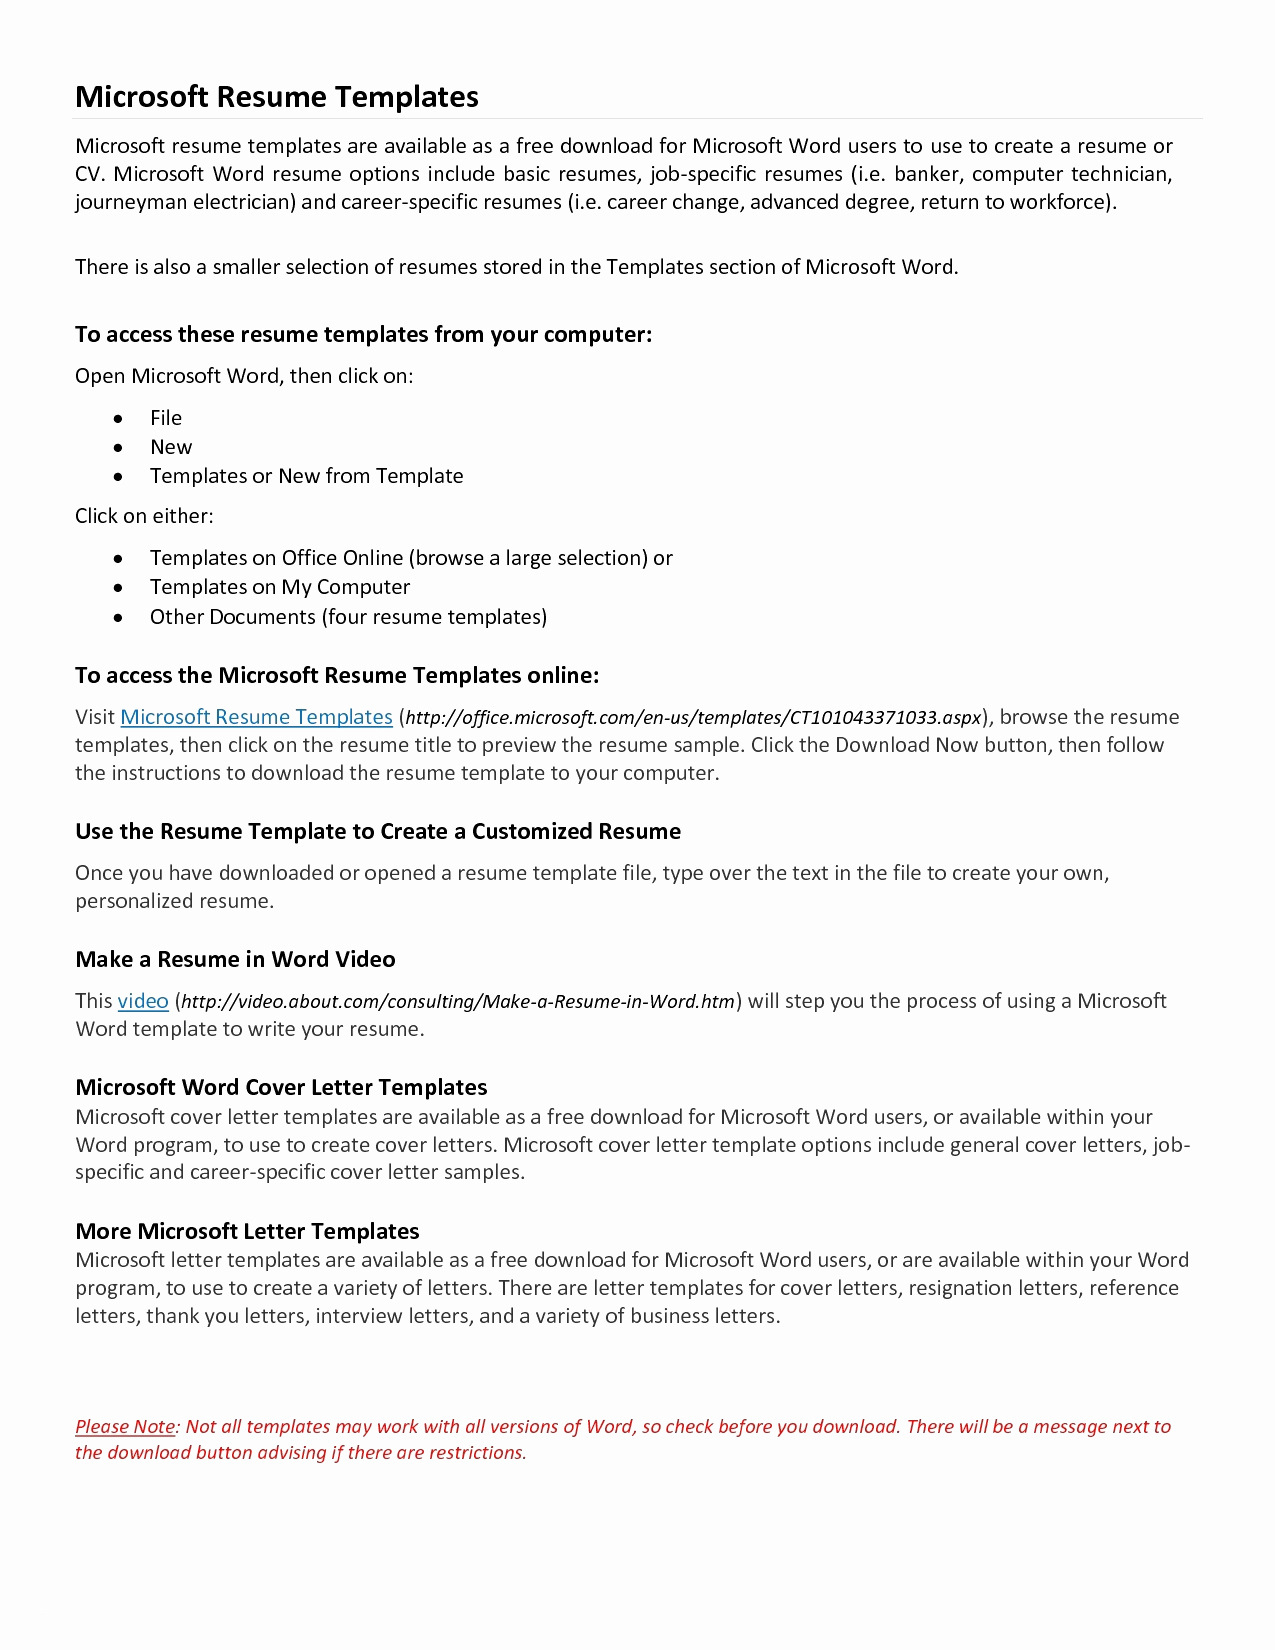 Resume and Cover Letter Template Microsoft Word - Free Microsoft Resume Templates New Microsoft Word Resume Sample